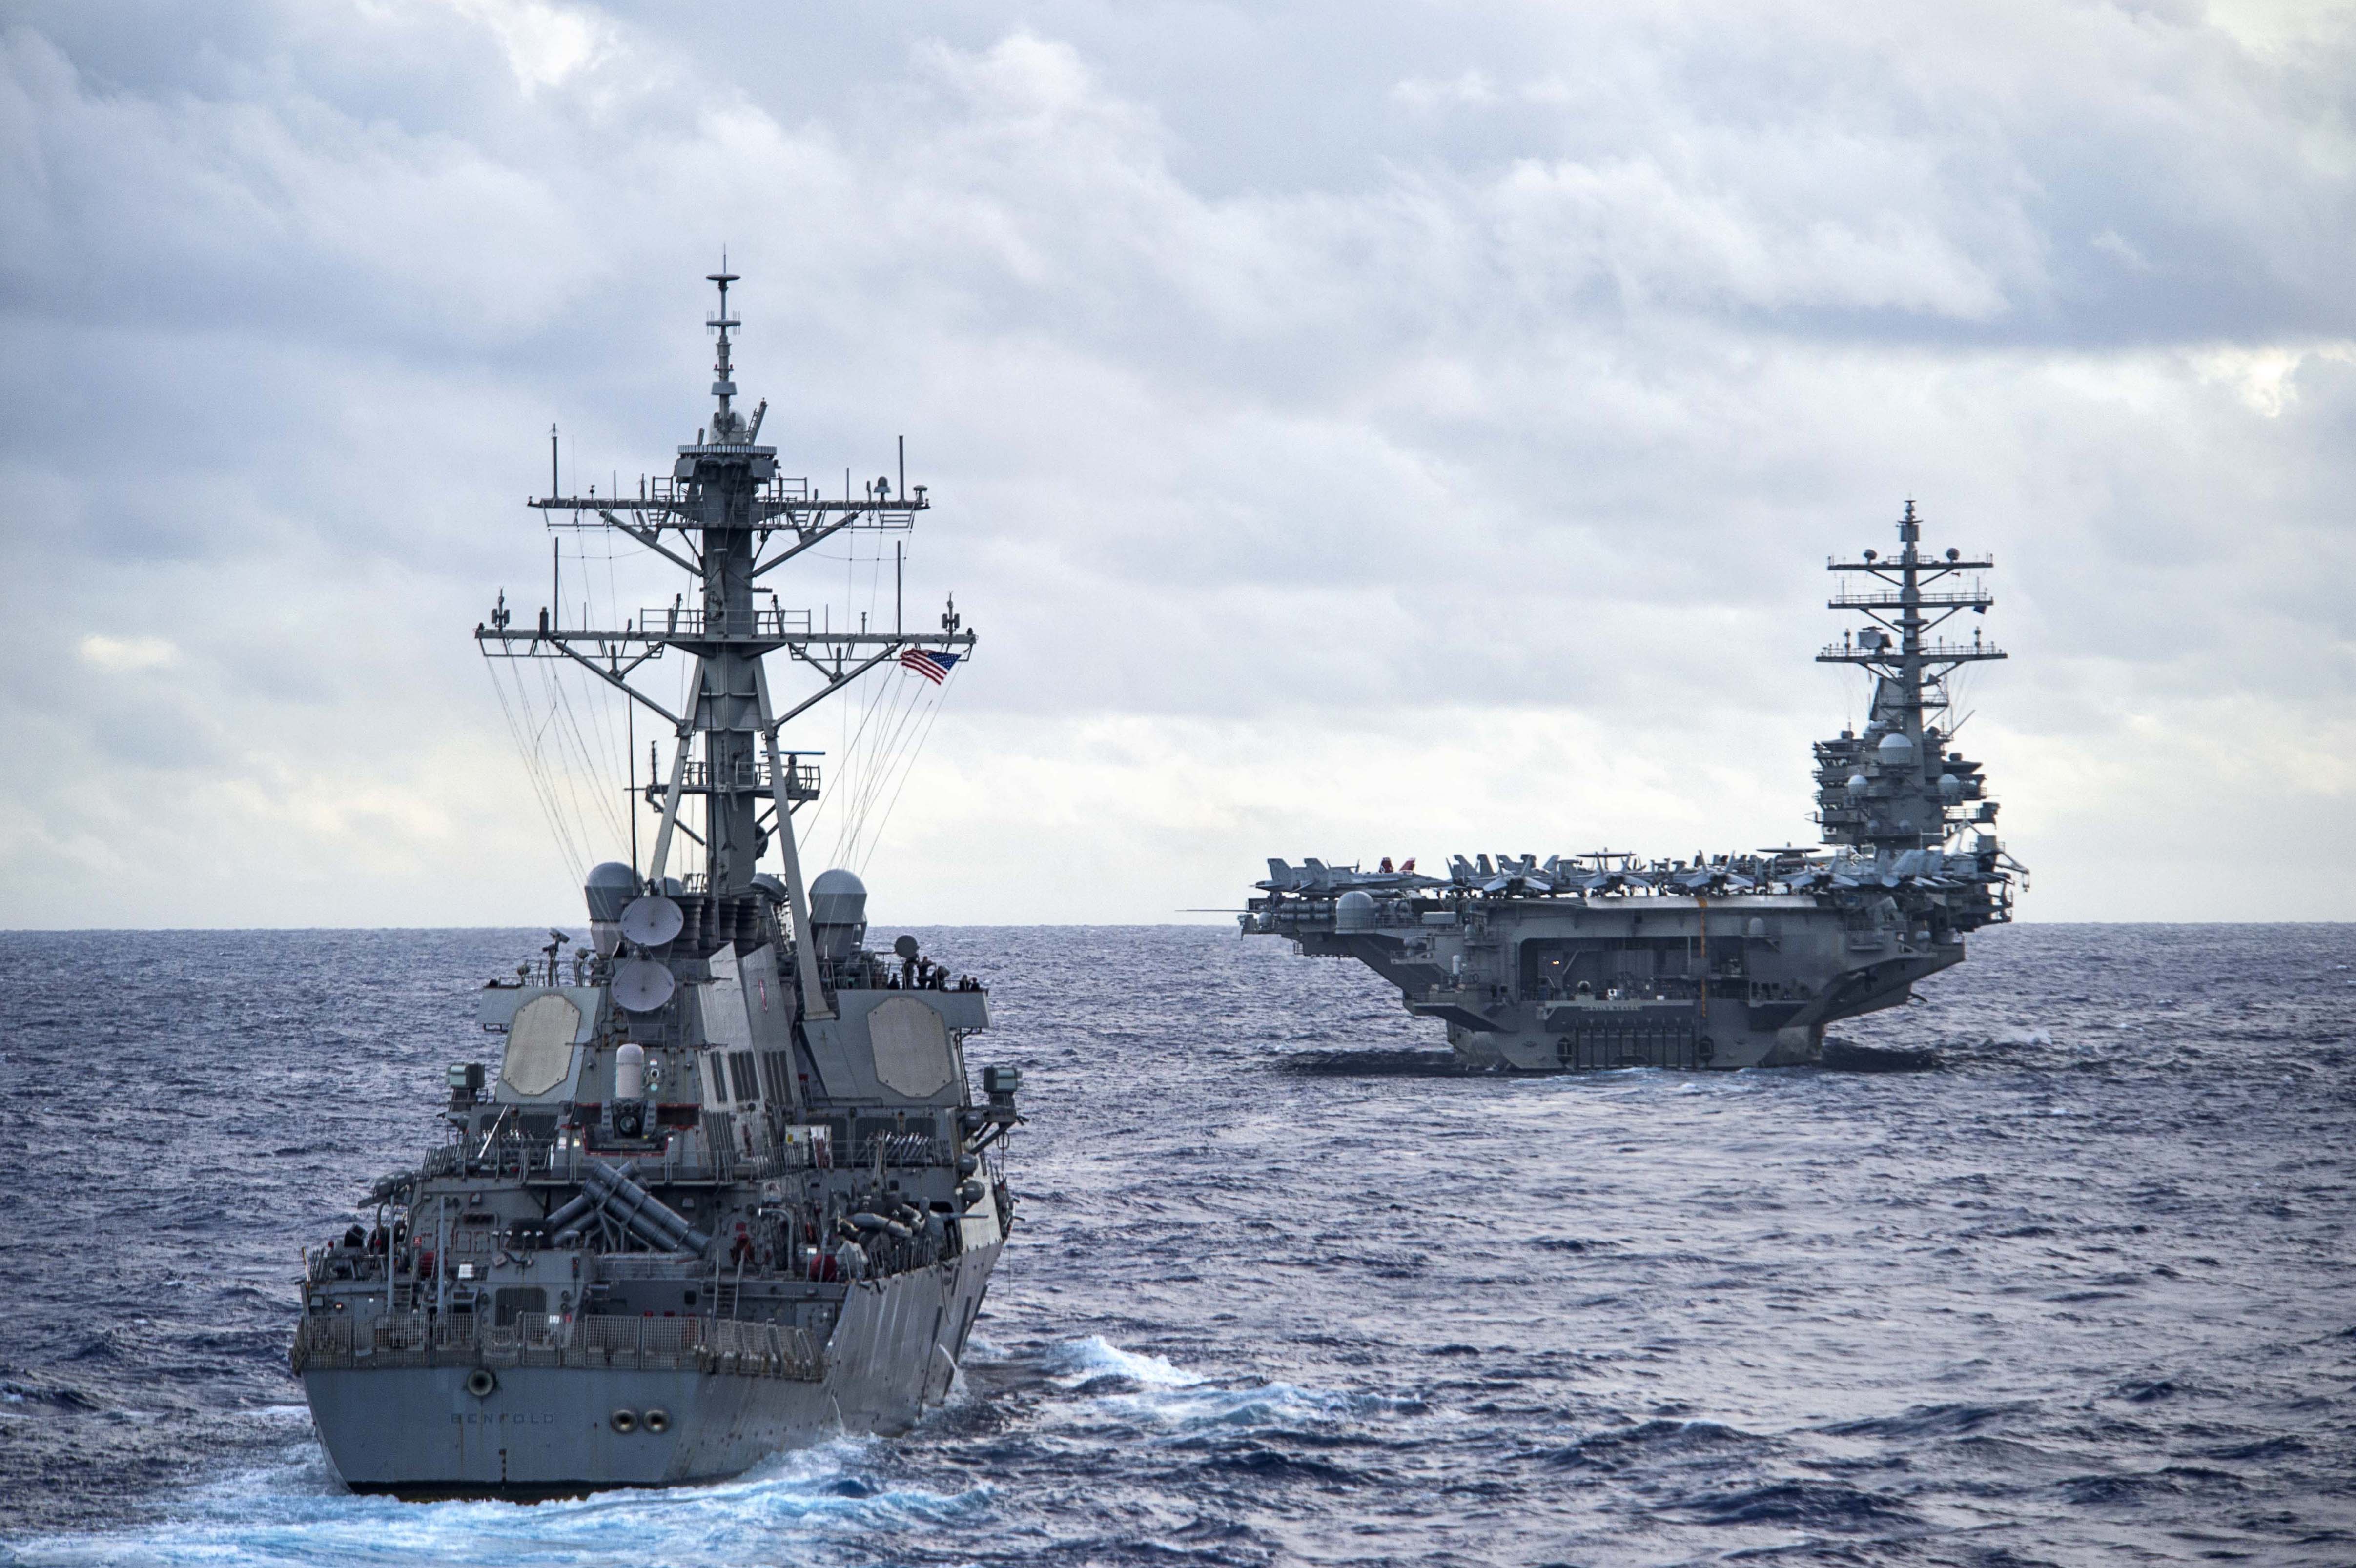 Arleigh Burke-class guided-missile destroyer USS Benfold (DDG-65), left, and the Nimitz-class Aircraft carrier USS Ronald Reagan (CVN-76) transit the Philippine Sea on Sept. 23, 2016. US Navy Photo